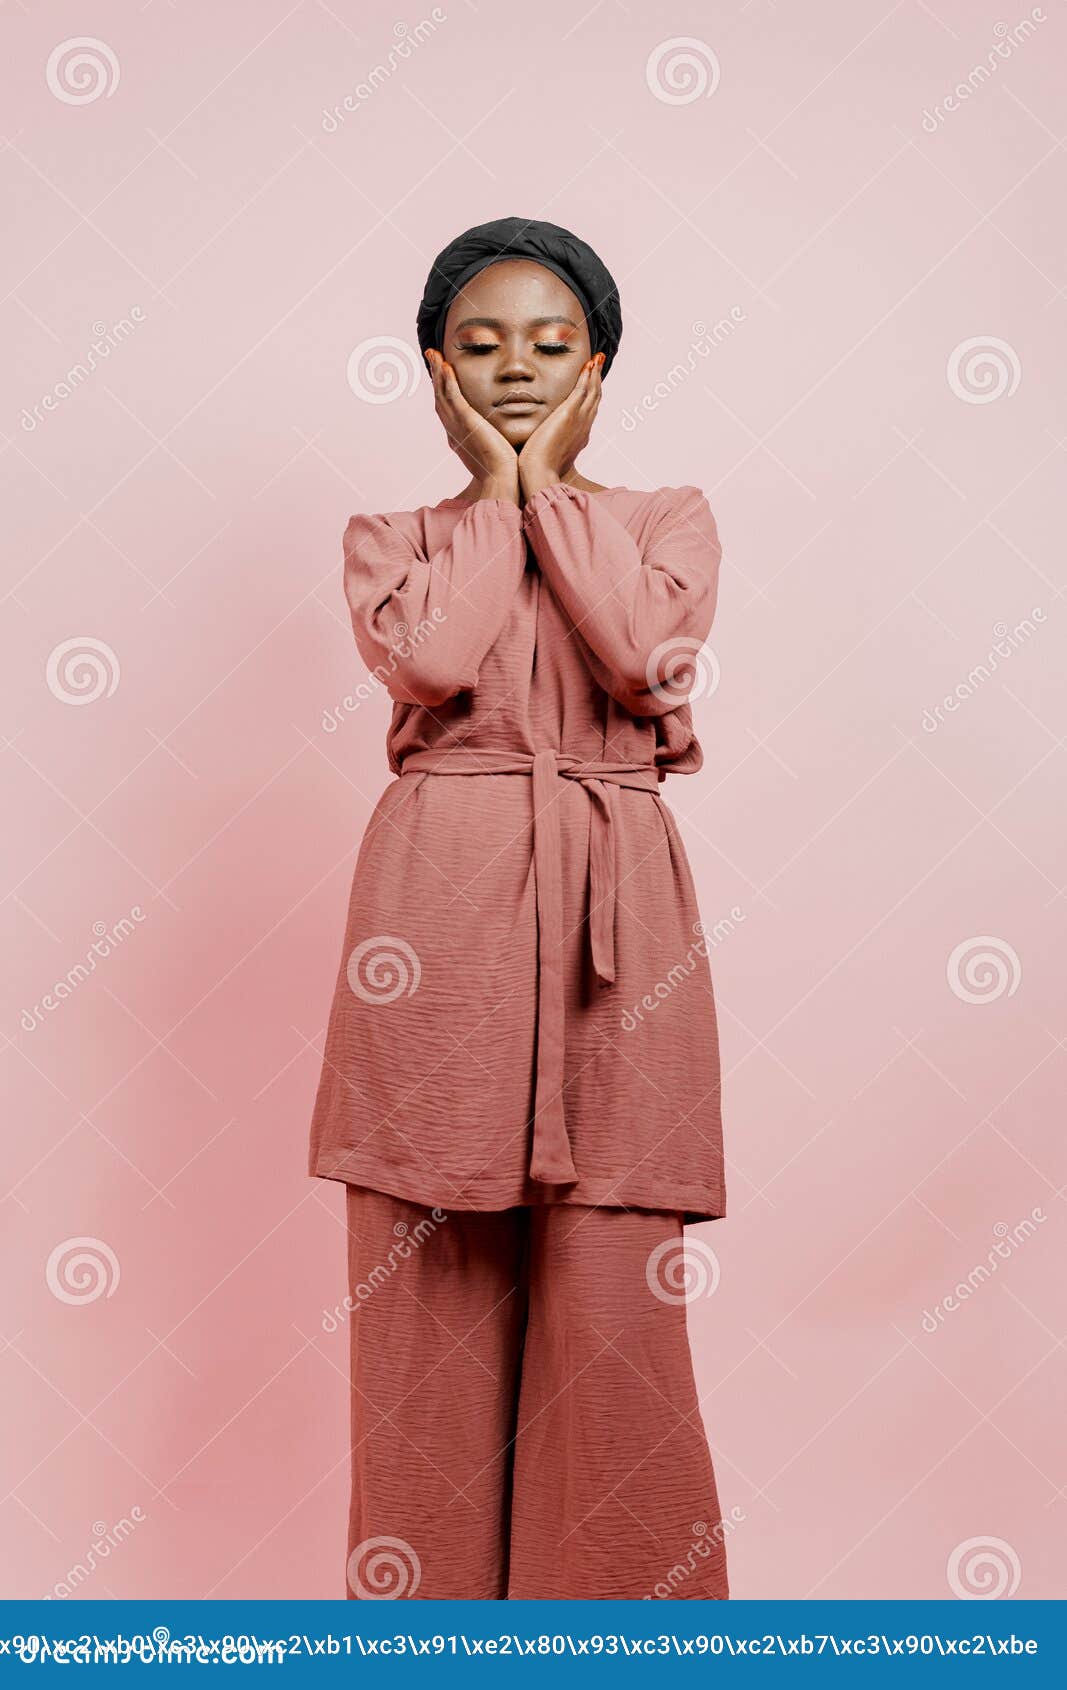 https://thumbs.dreamstime.com/z/muslim-young-woman-weared-traditional-dress-scarf-touches-her-face-relax-relaxation-meditation-yoga-222184535.jpg